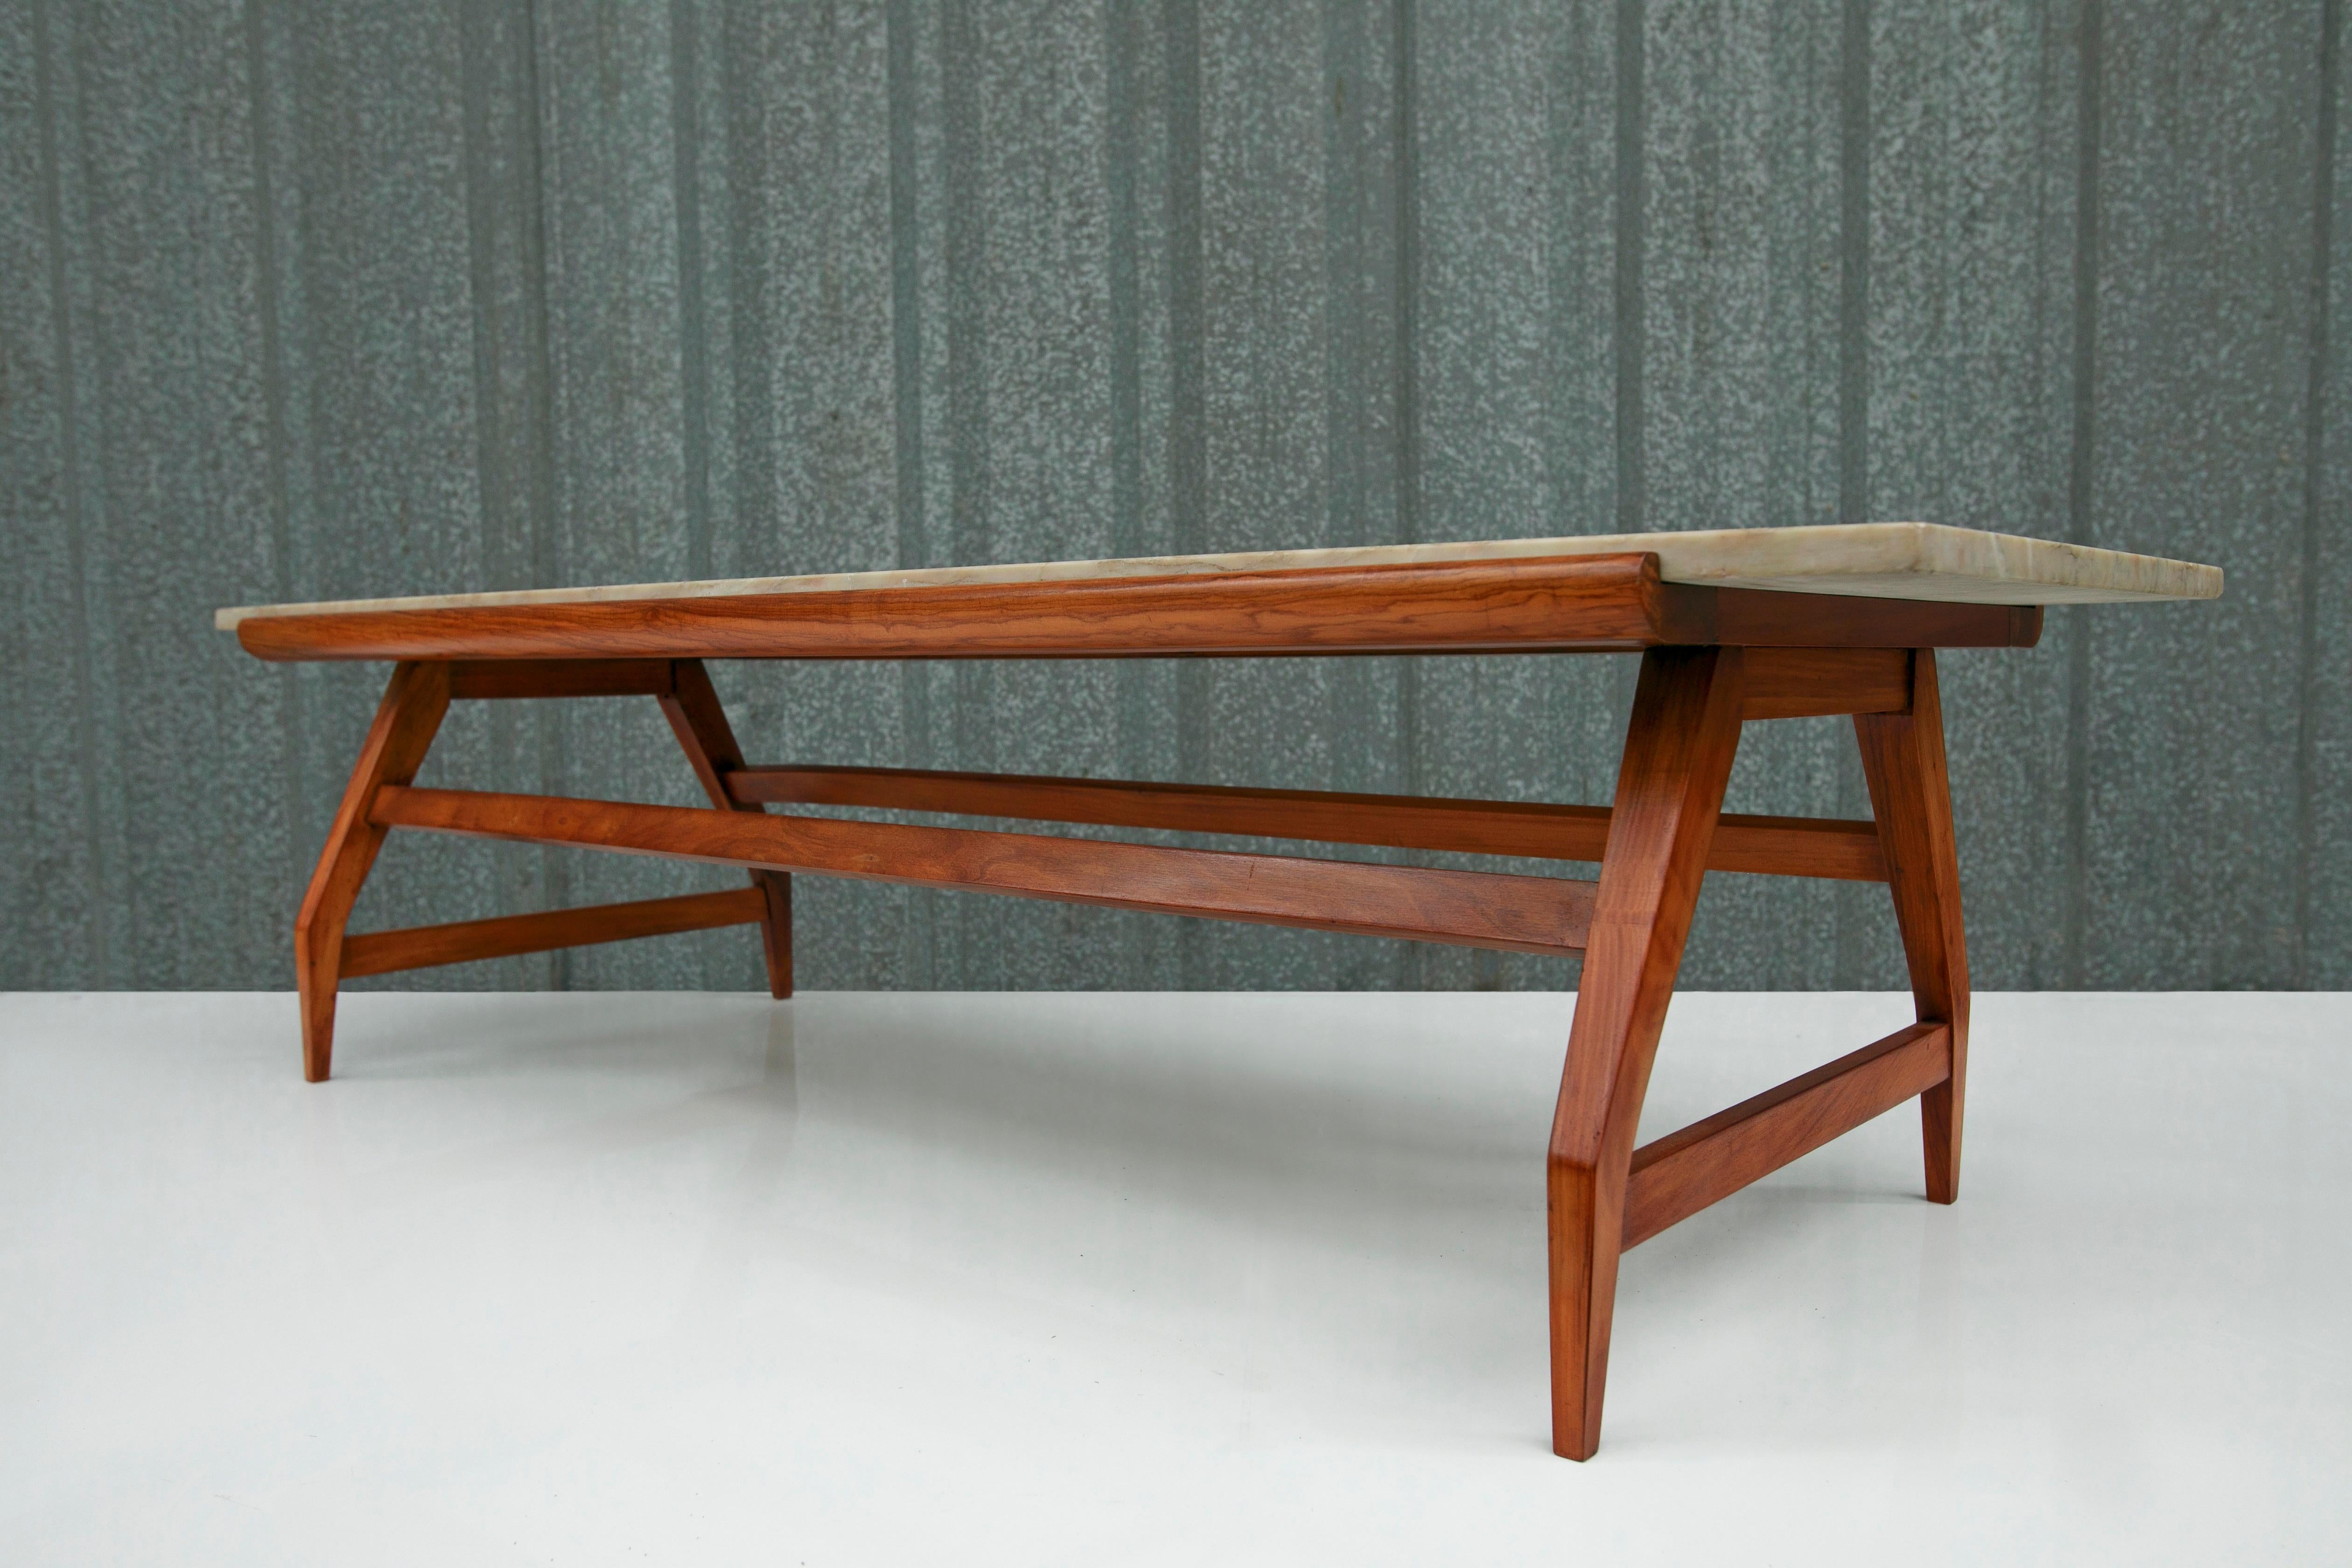 Brazilian Mid-Century Modern Coffee Table in Hardwood & Marble, G.Scapinelli 1950s, Brazil For Sale